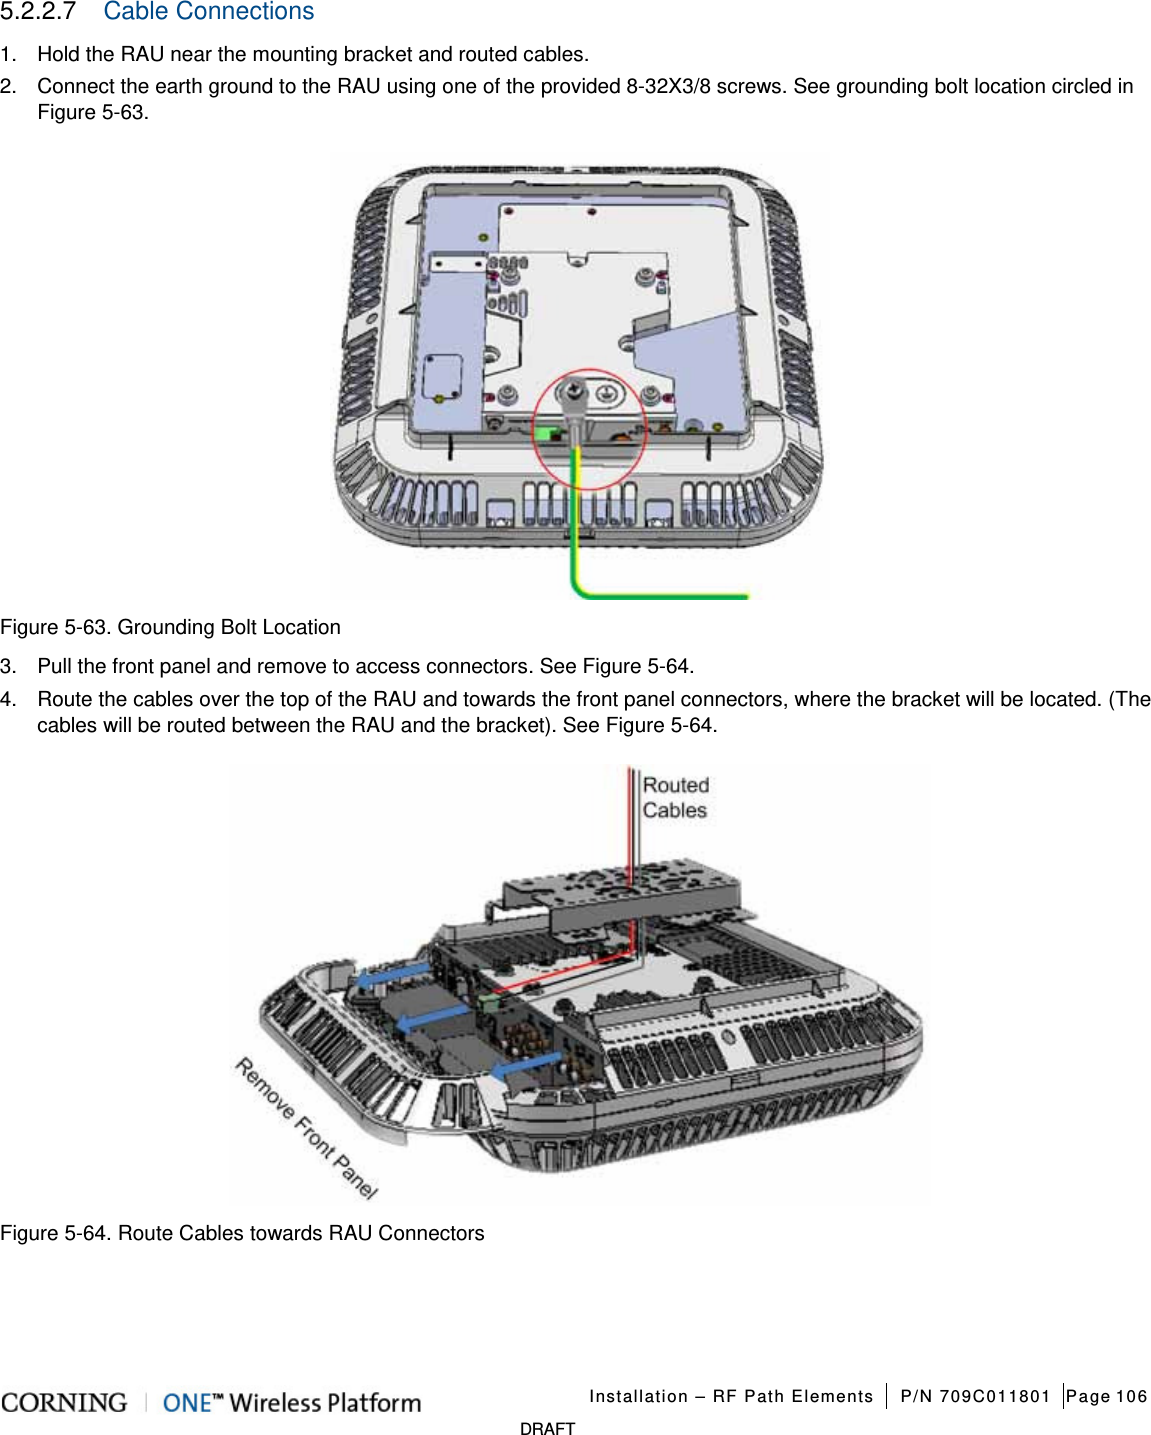   Installation – RF Path Elements P/N 709C011801 Page 106   DRAFT 5.2.2.7  Cable Connections 1.  Hold the RAU near the mounting bracket and routed cables. 2.  Connect the earth ground to the RAU using one of the provided 8-32X3/8 screws. See grounding bolt location circled in Figure  5-63.      Figure  5-63. Grounding Bolt Location 3.  Pull the front panel and remove to access connectors. See Figure  5-64.   4.  Route the cables over the top of the RAU and towards the front panel connectors, where the bracket will be located. (The cables will be routed between the RAU and the bracket). See Figure  5-64.    Figure  5-64. Route Cables towards RAU Connectors    